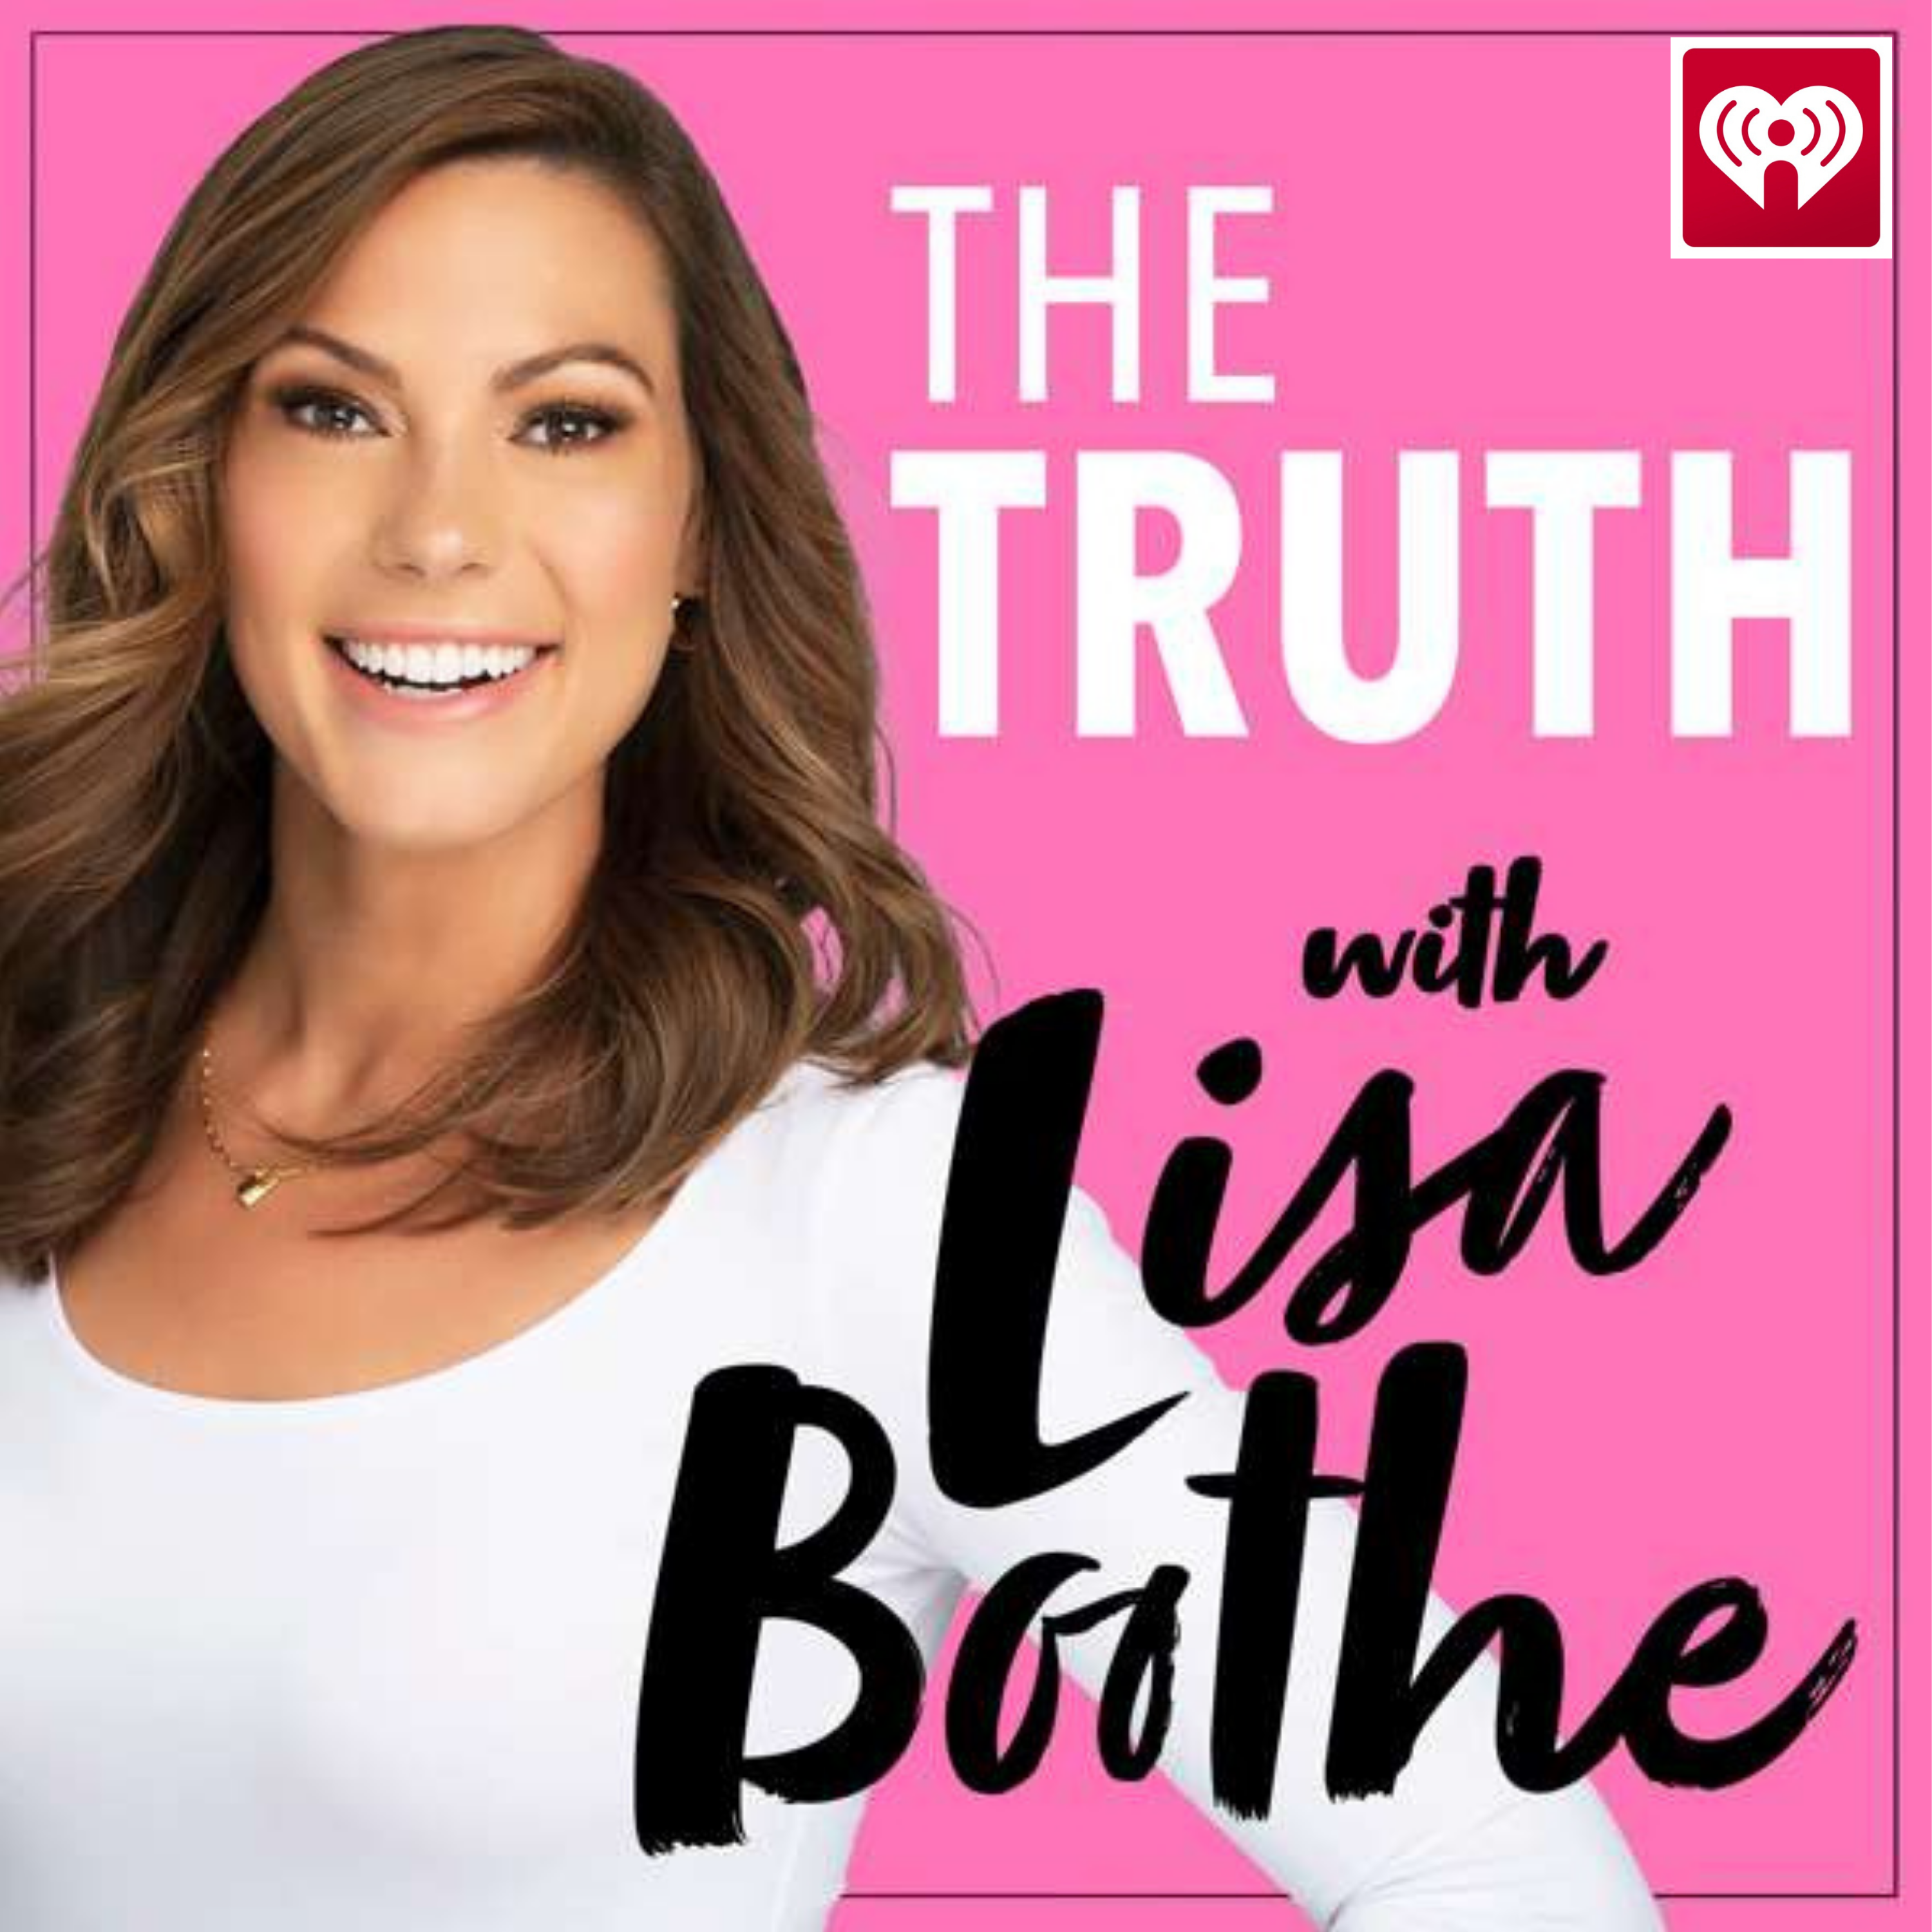 The Truth with Lisa Boothe: War, Sacrifice, and Reflection with American Hero, Sean Parnell